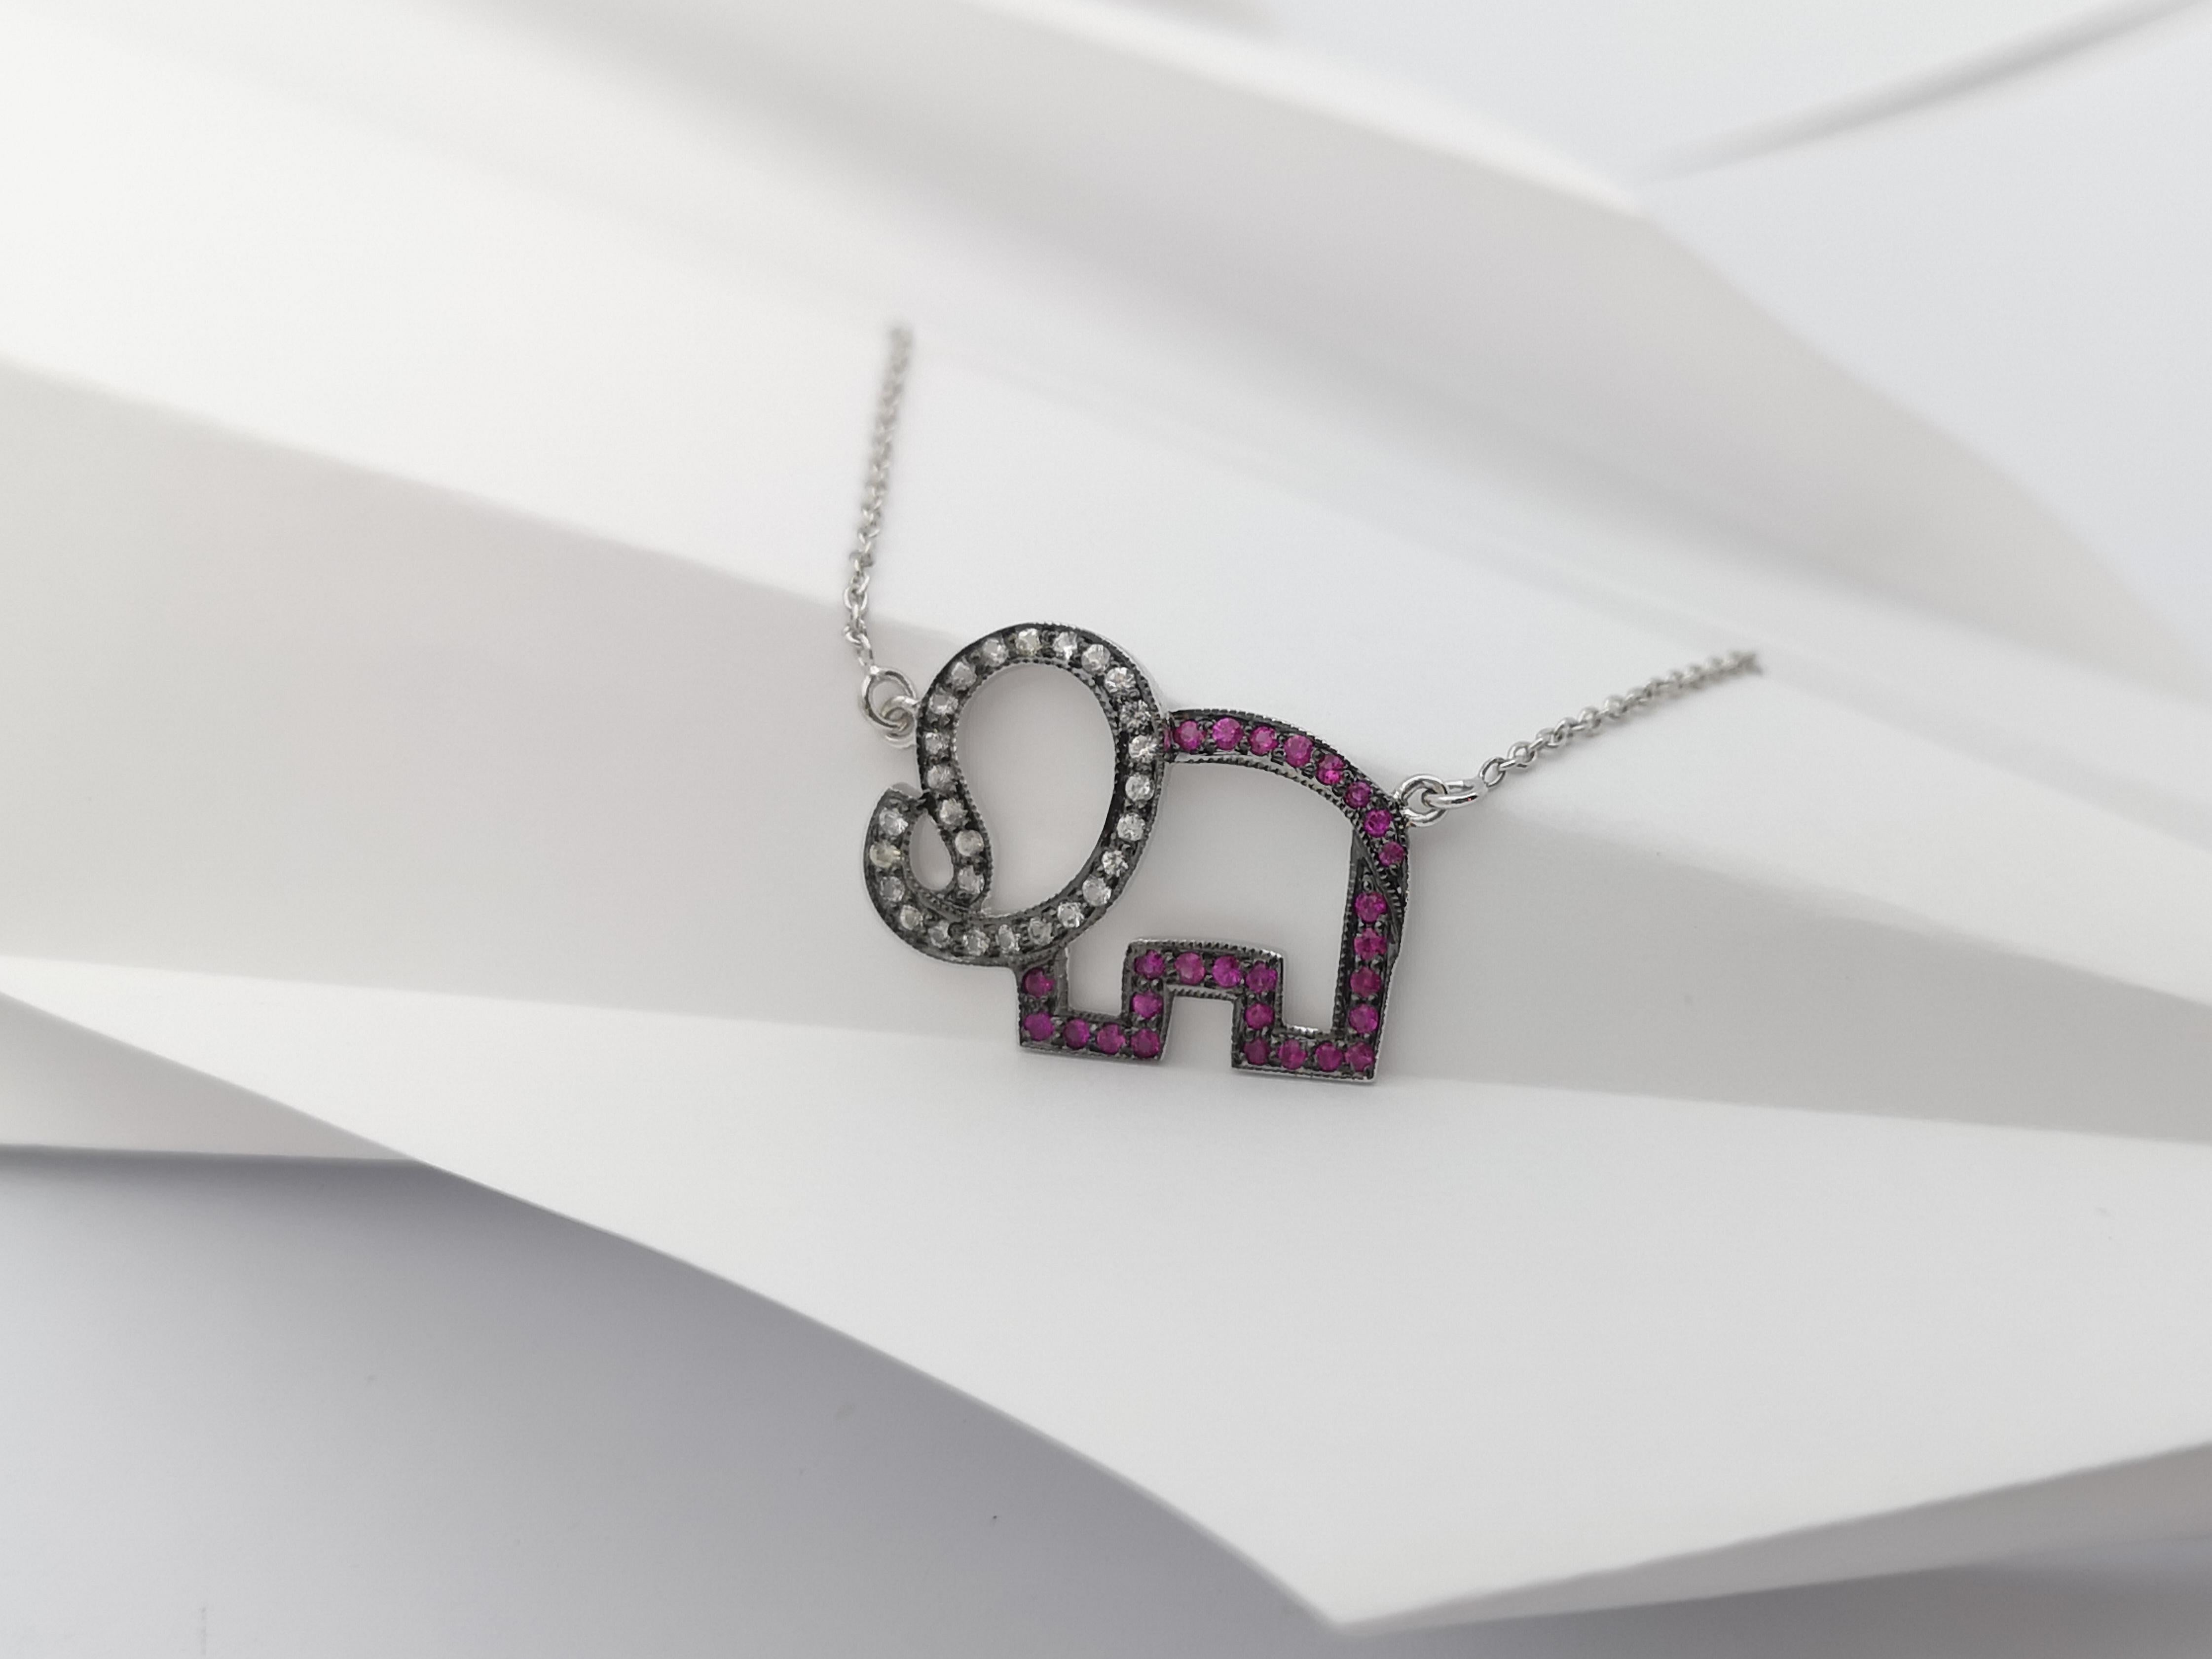 Pink Sapphire and White Sapphire Necklace set in Silver Settings

Width:  1.9 cm 
Length:  45.5 cm
Total Weight: 3.48 grams

*Please note that the silver setting is plated with rhodium to promote shine and help prevent oxidation.  However, with the